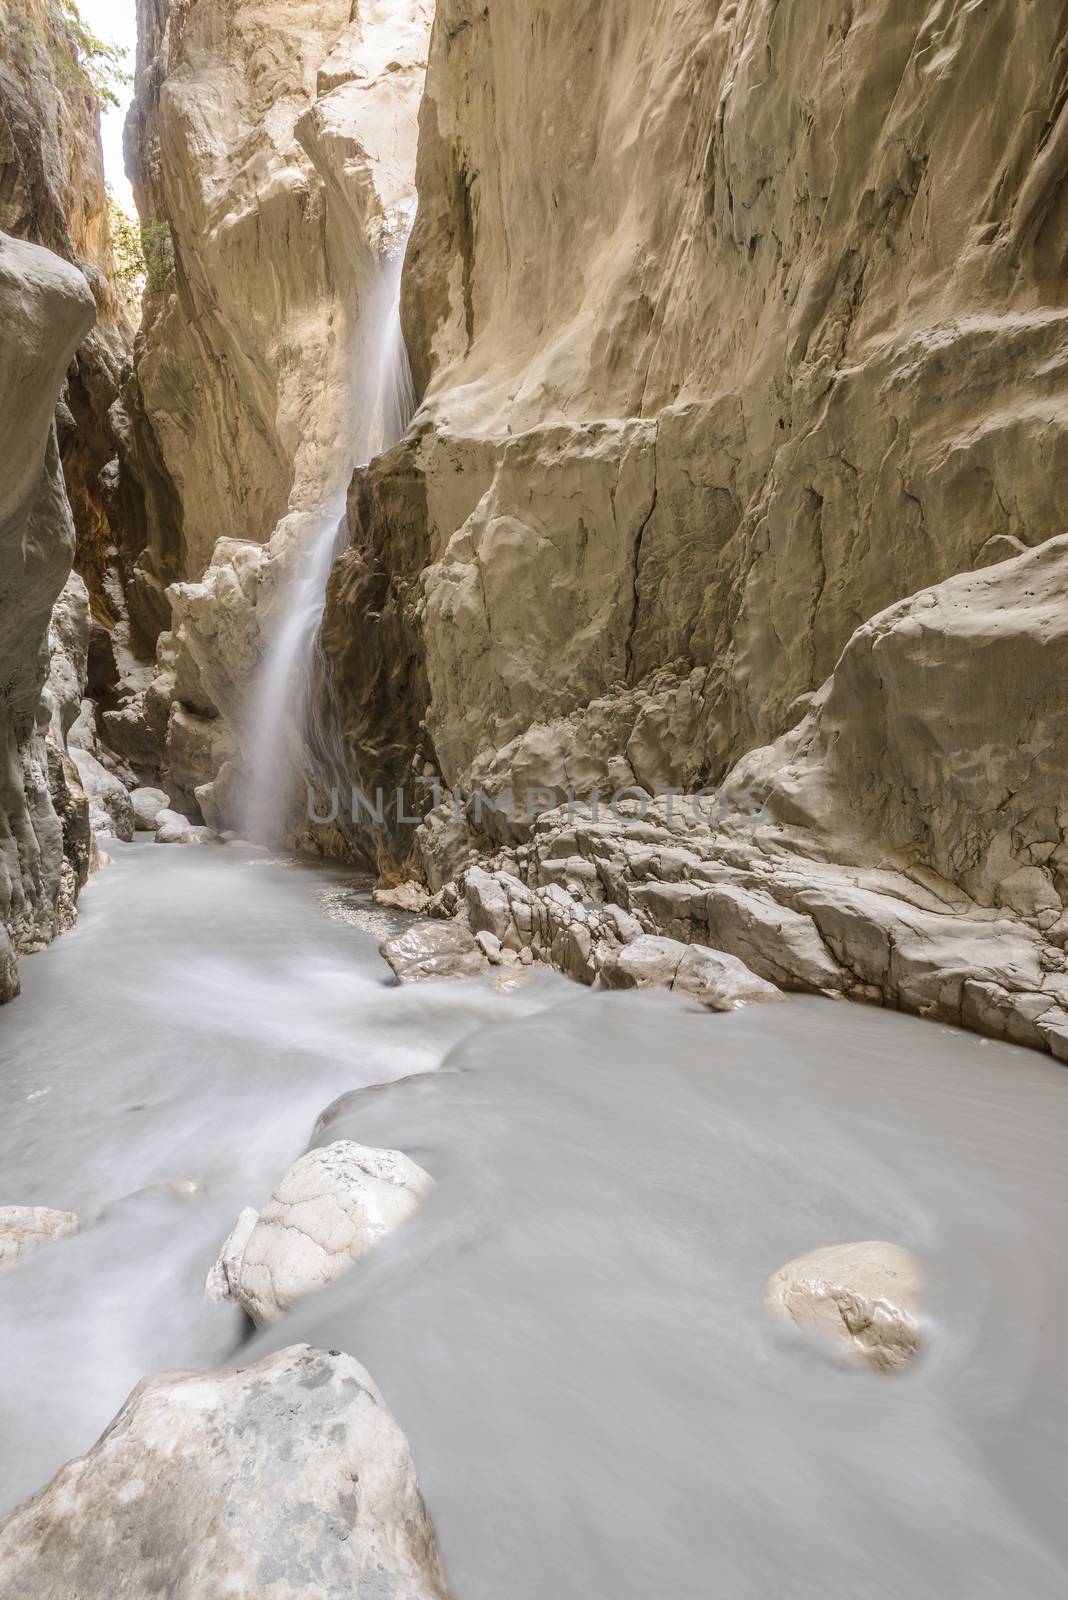 Saklikent Gorge, a slot canyon and tourist attraction in Southern Turkey near Fethiye